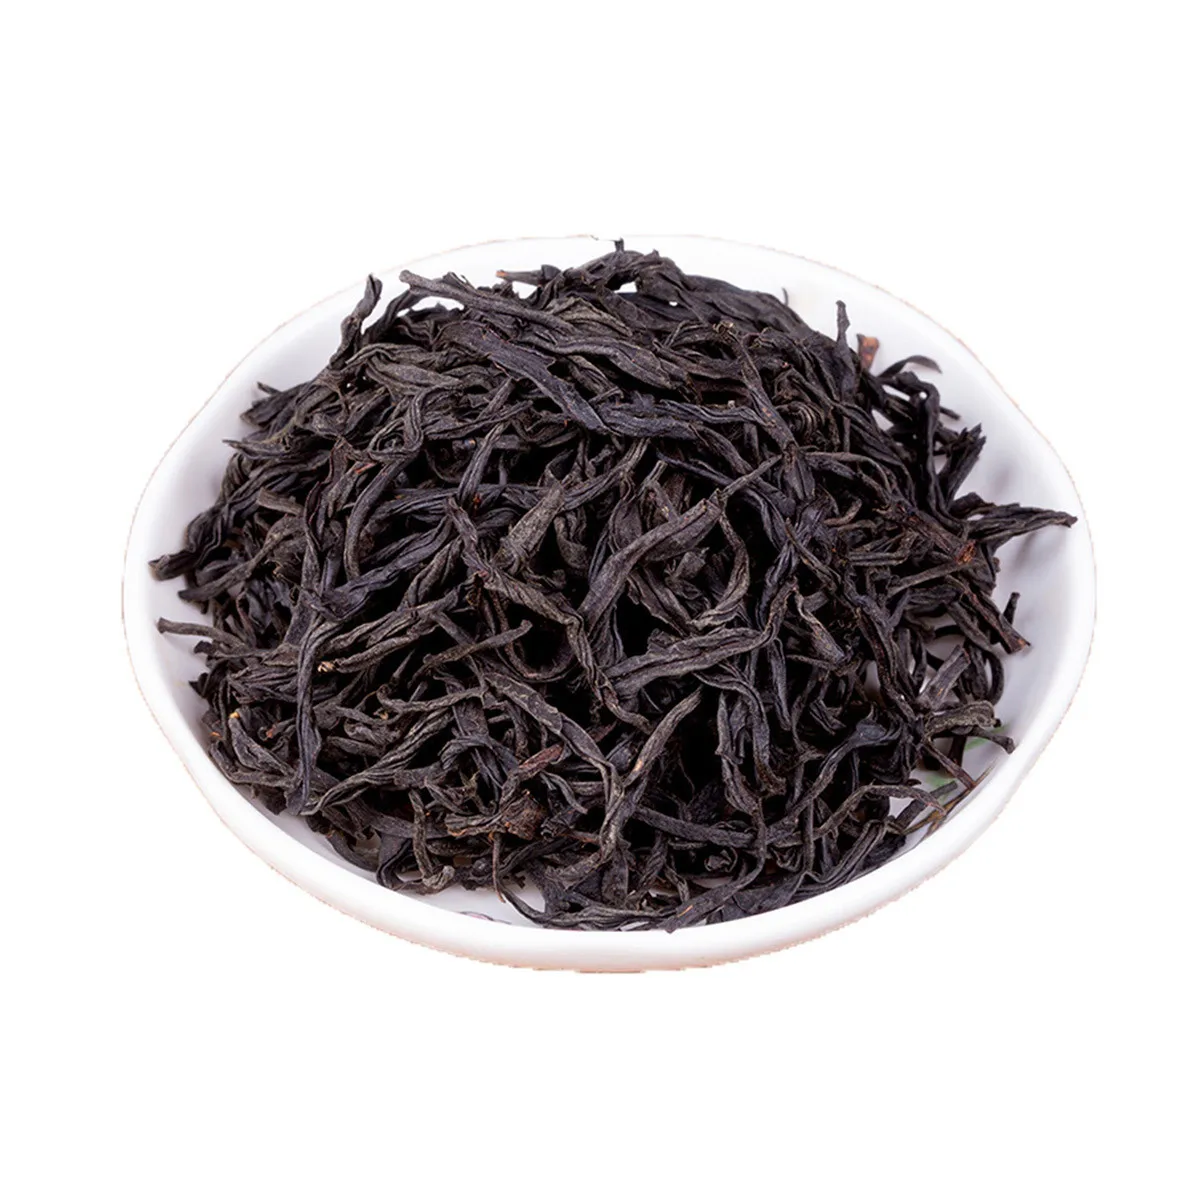 

Organic Smoky Lapsang Souchong Top Smoked China Black Tea Health Care New Cooked Tea Factory Direct Sales250g